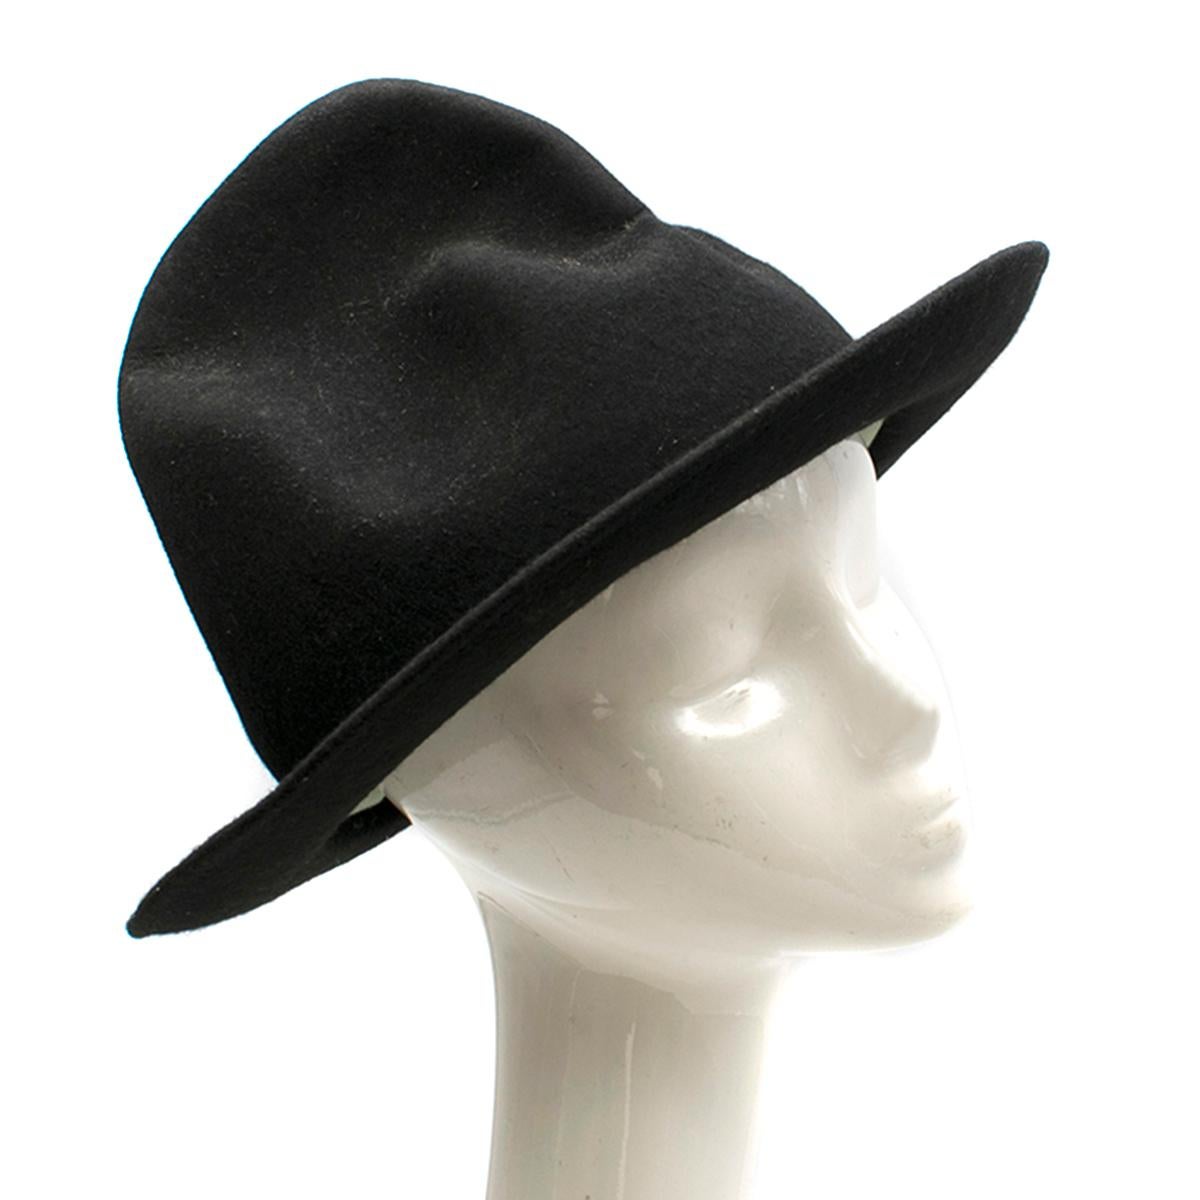 Vivienne Westwood Mountain hat

- Black, felt 
- Asymmetric moulded crown 
- Structured brim 
- Padded brow band 
- Unlined 

Please note, these items are pre-owned and may show some signs of storage, even when unworn and unused. This is reflected